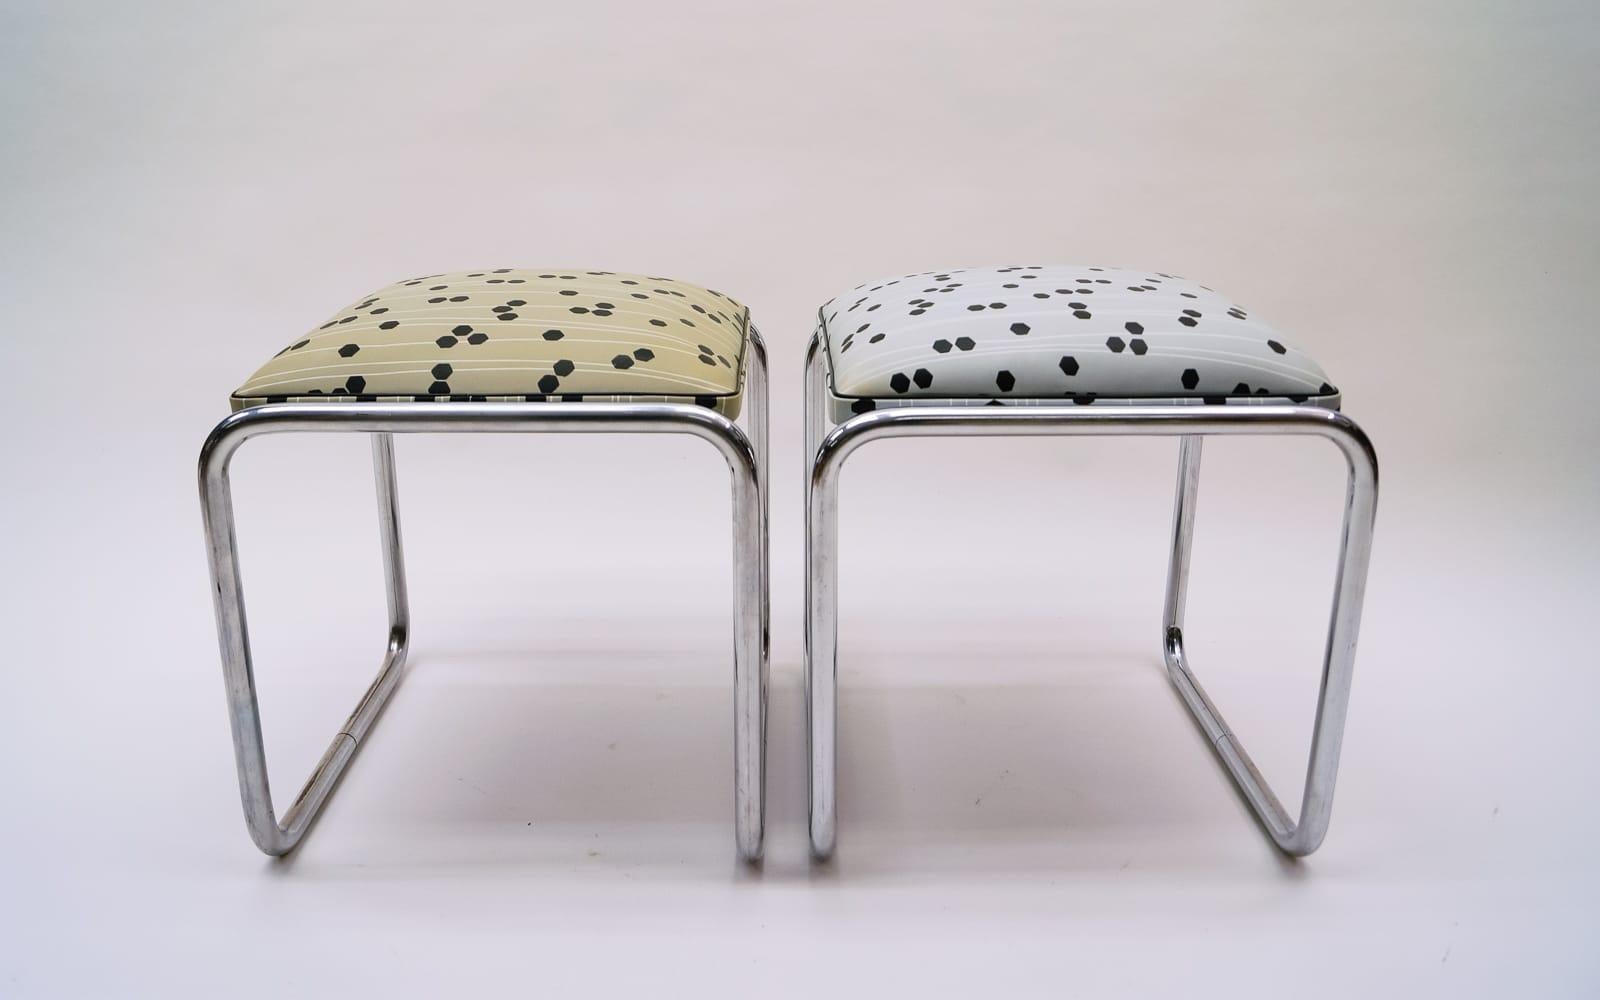 Metal Pair of Tubular Steel Bauhaus Stools with Graphic Patterns, 1940s, Germany